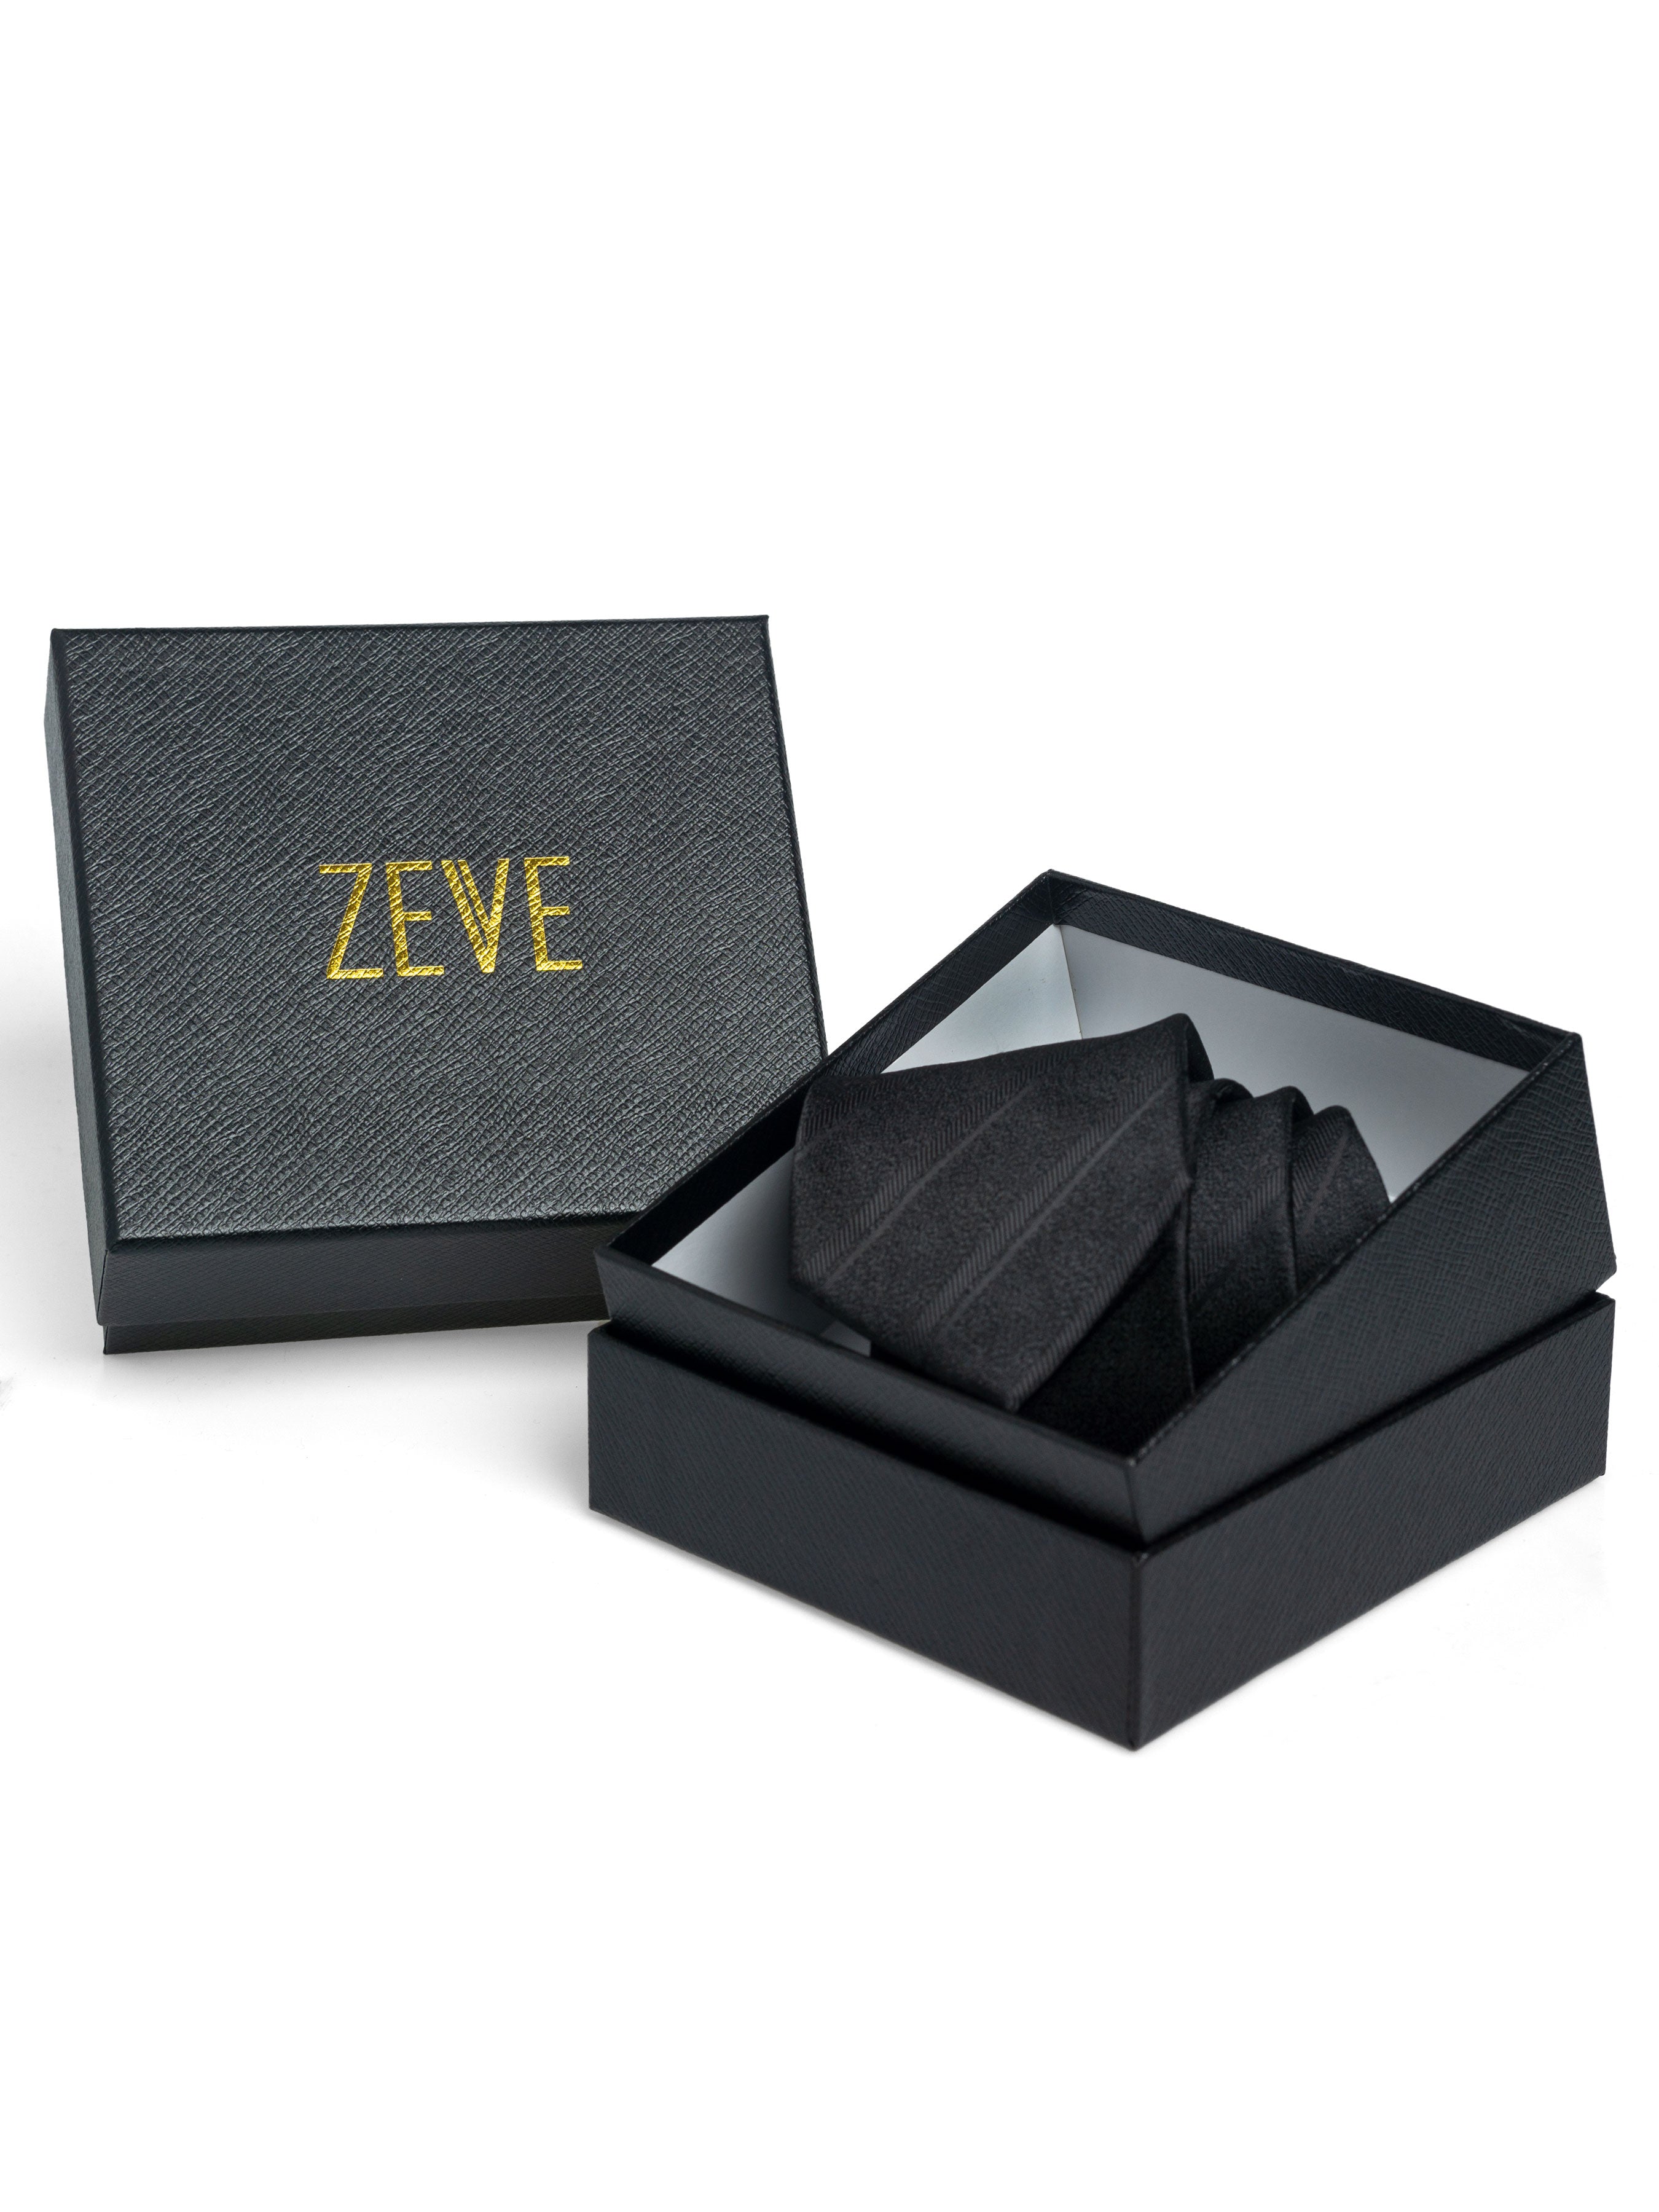 Brushed Abstract Tie - Bronze - Zeve Shoes